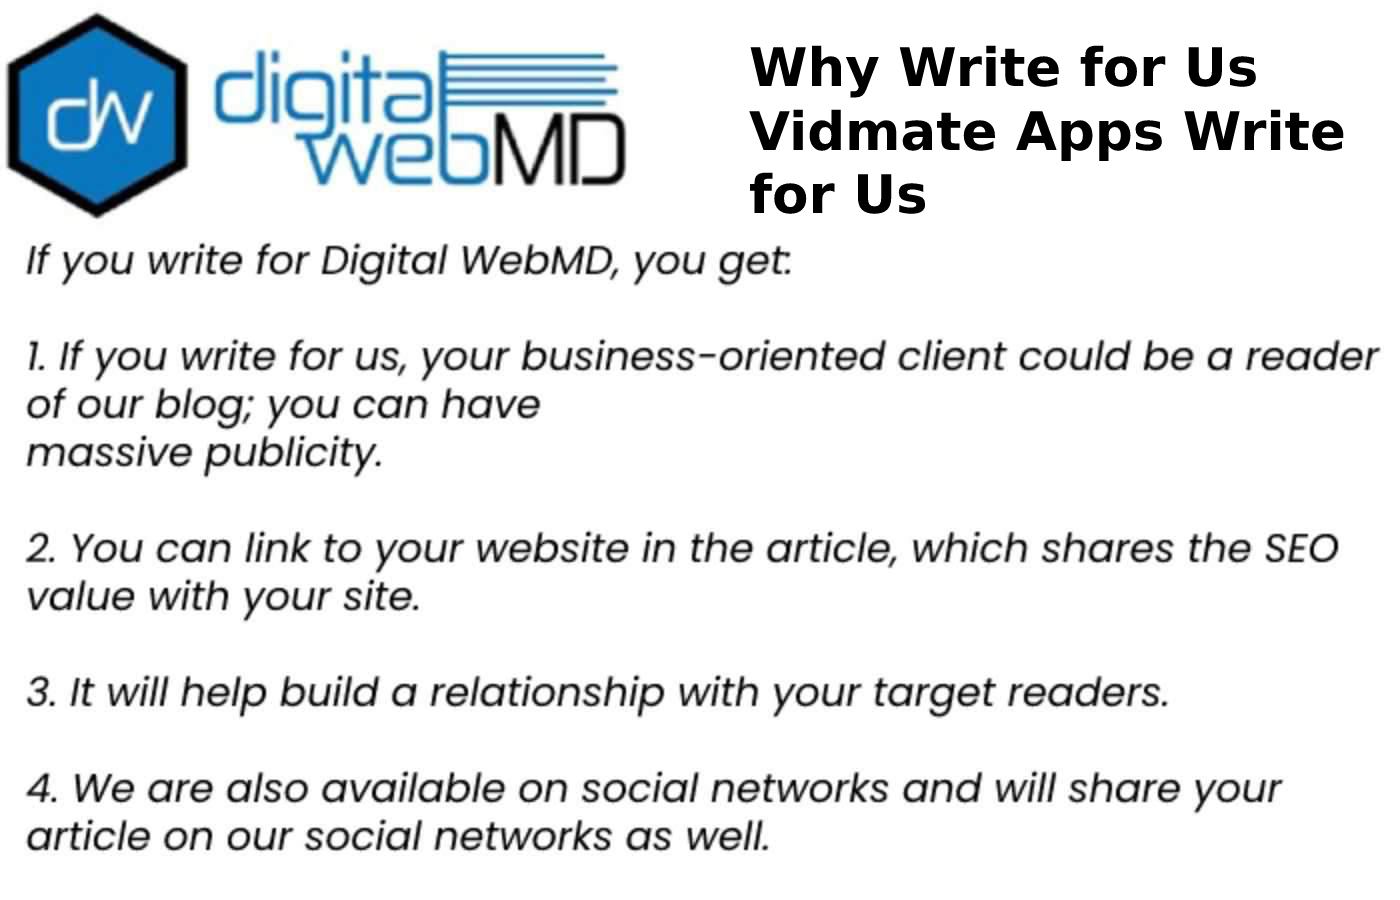 Why Write for Us Vidmate Apps Write for Us